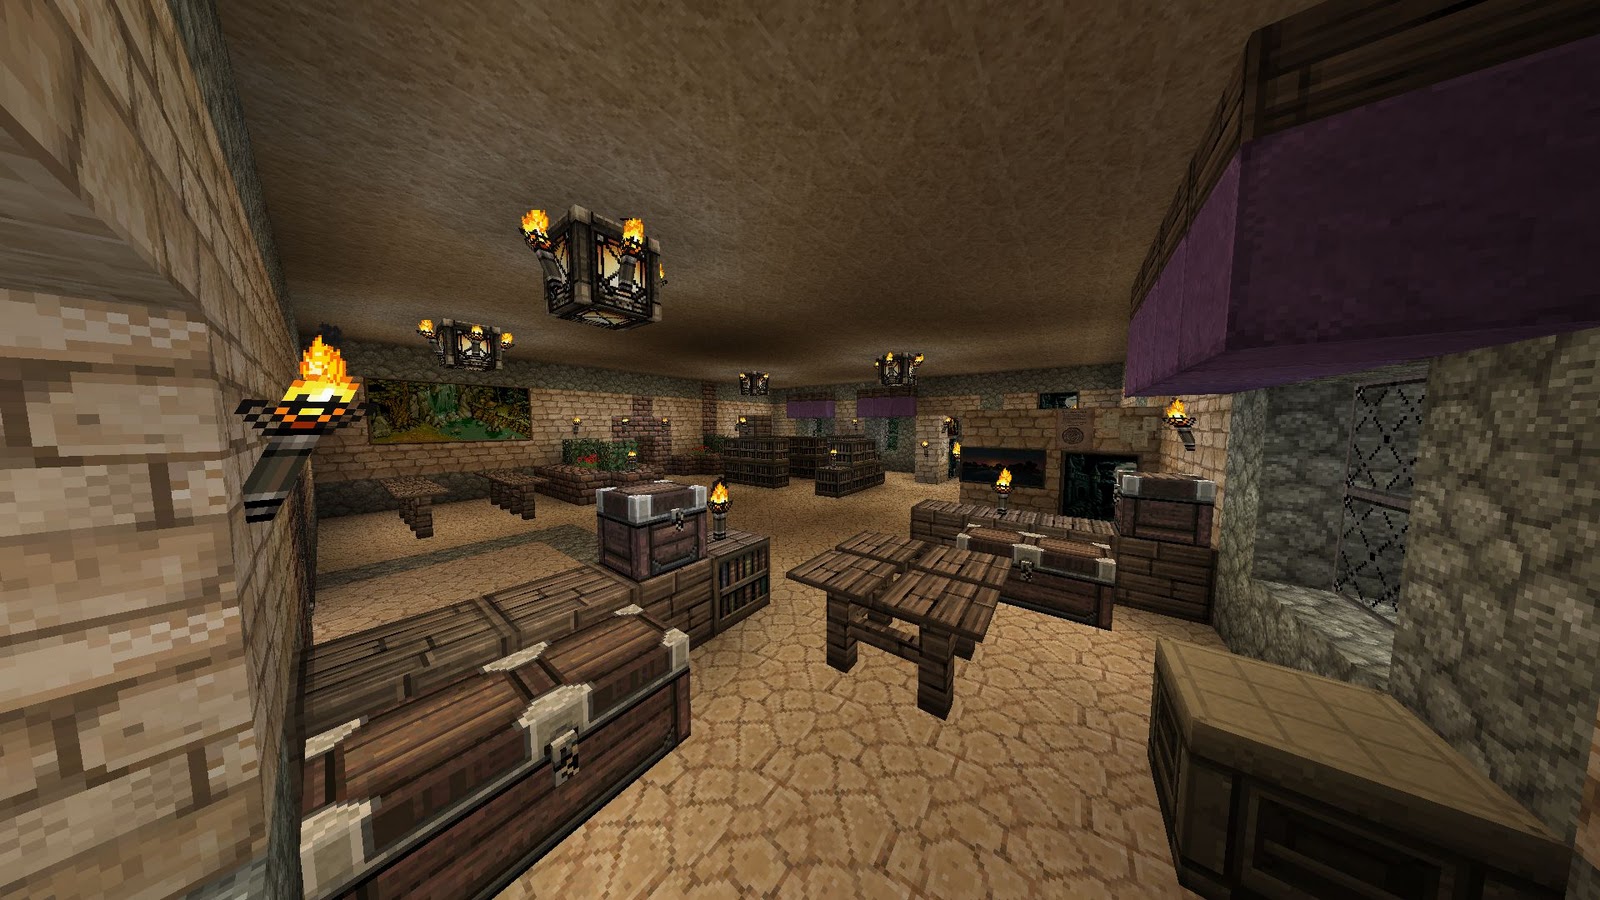 Free Download Minecraft Living Room Ideas For Bedroom 590x331 Minecraft Wallpapers 1600x900 For Your Desktop